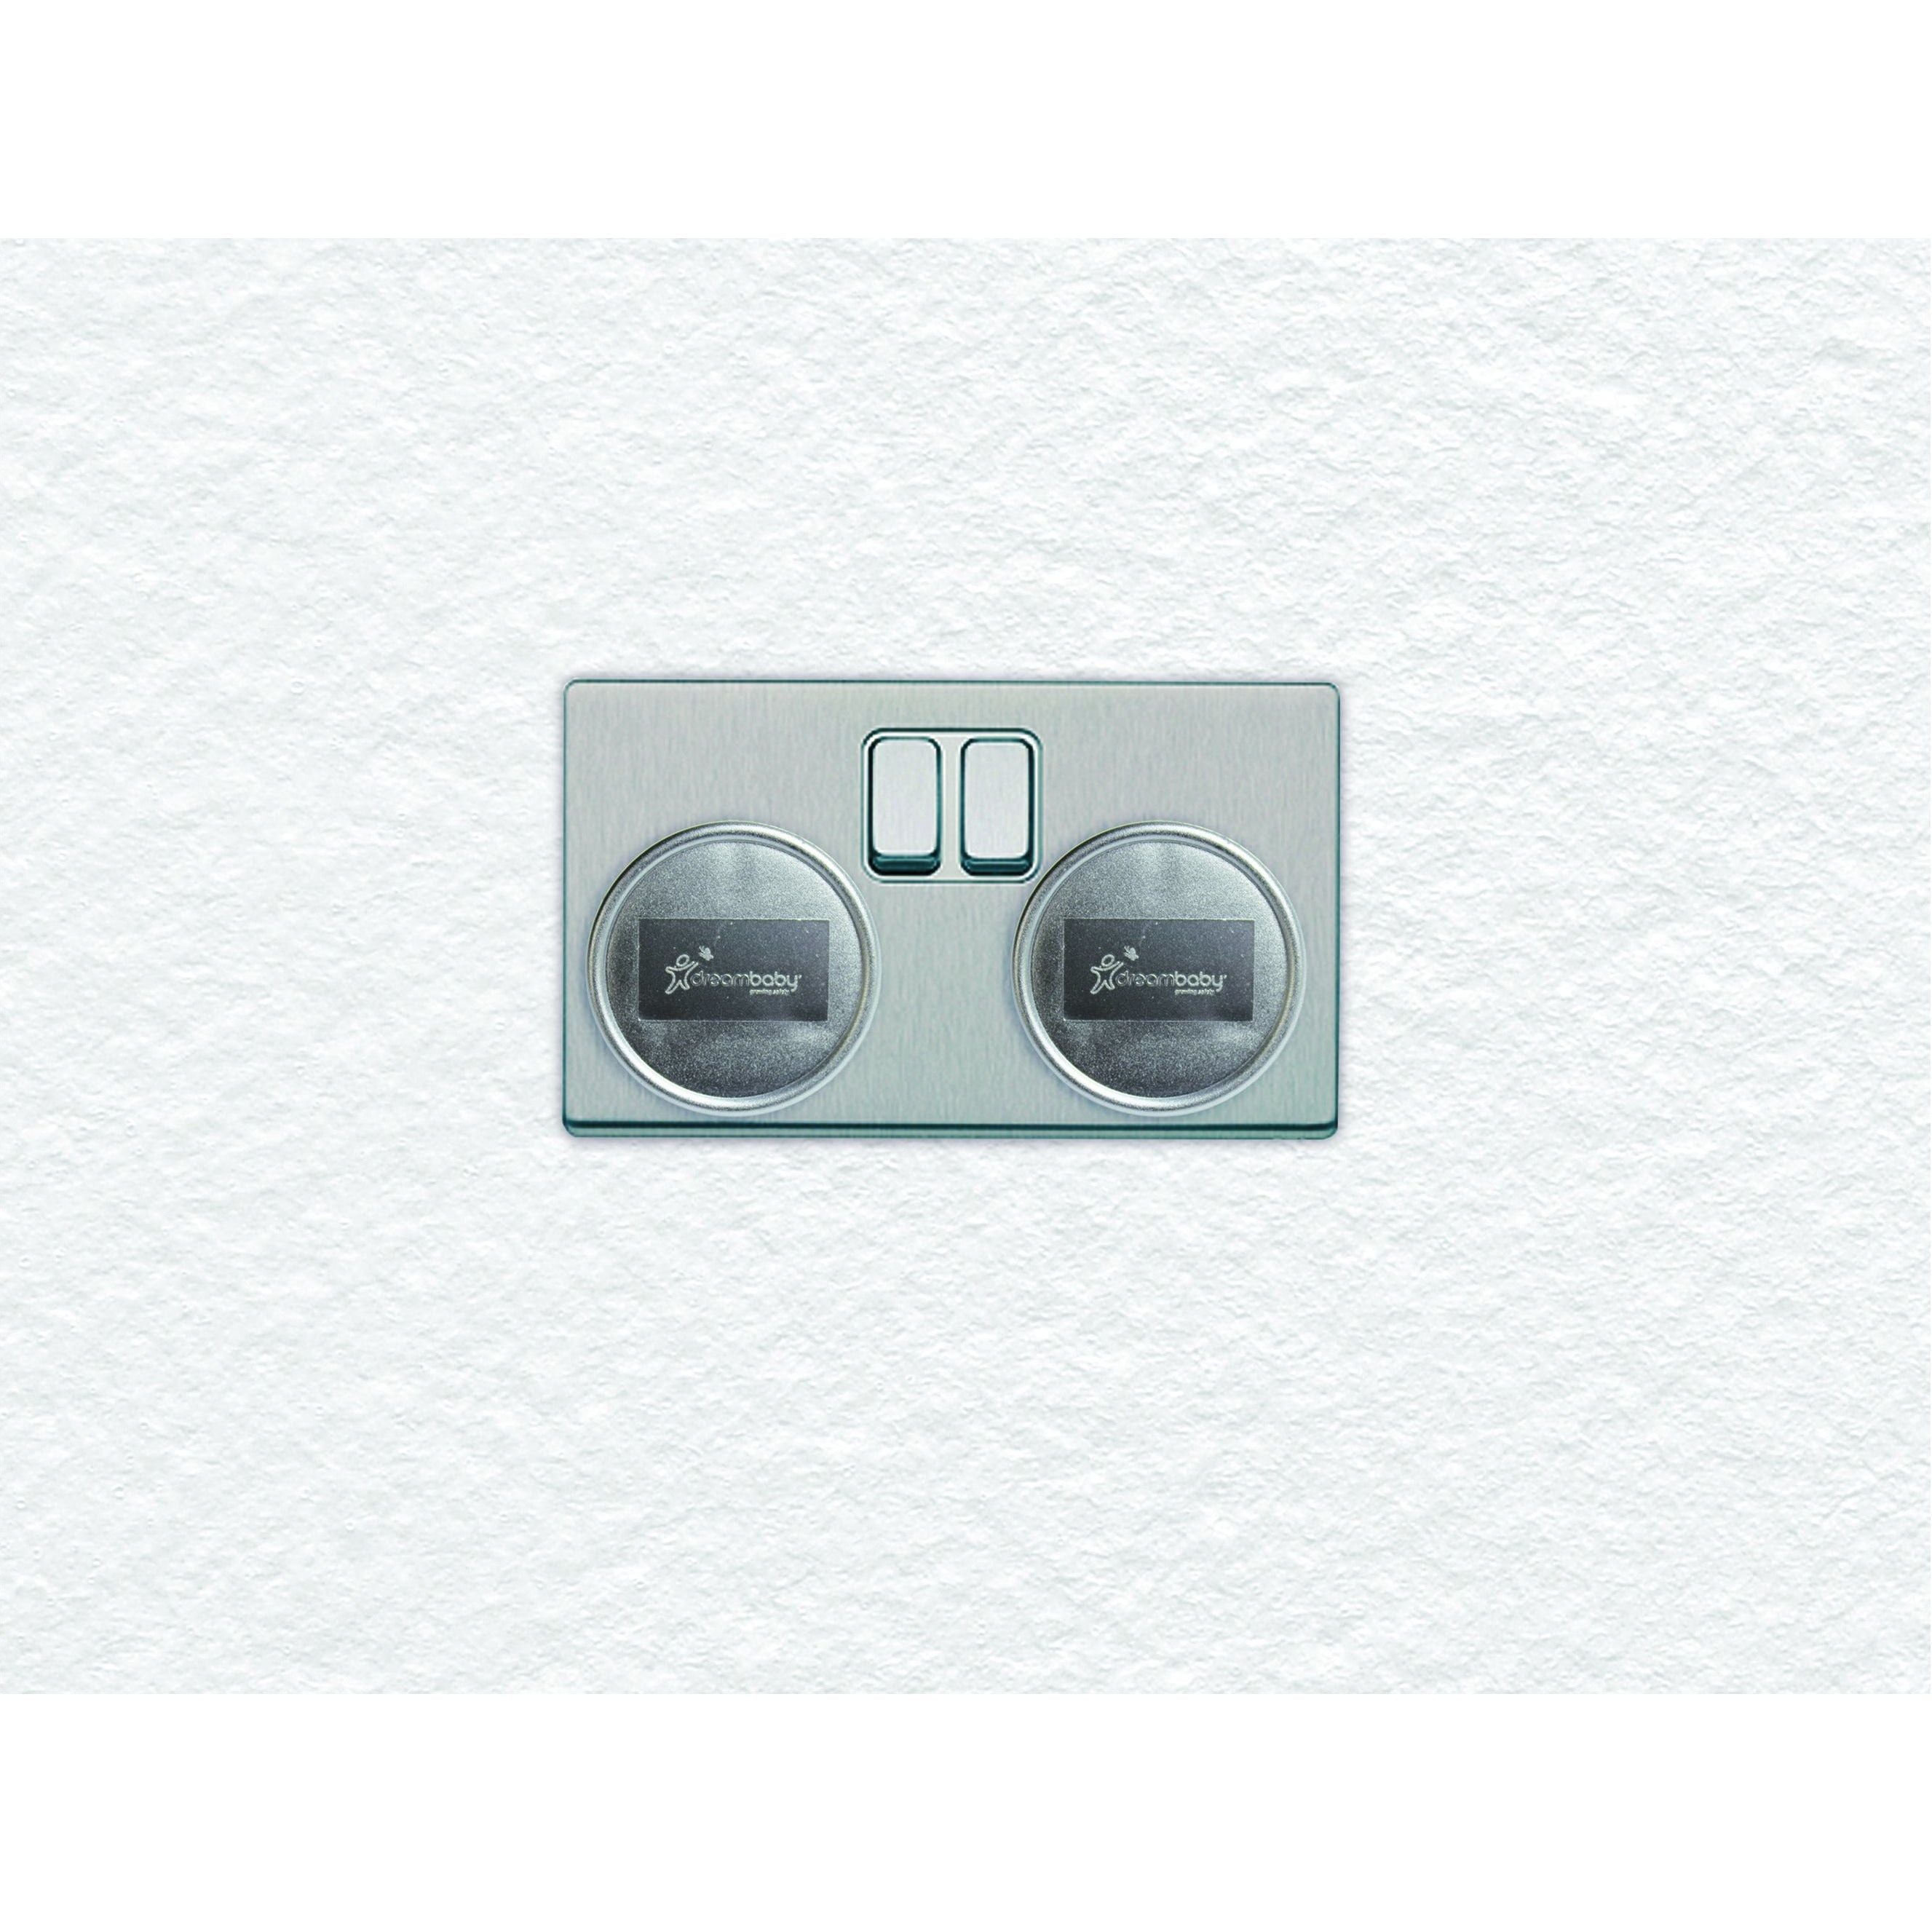 Dreambaby Outlet Plugs 6pk - Silver DB01044 | Little Baby.